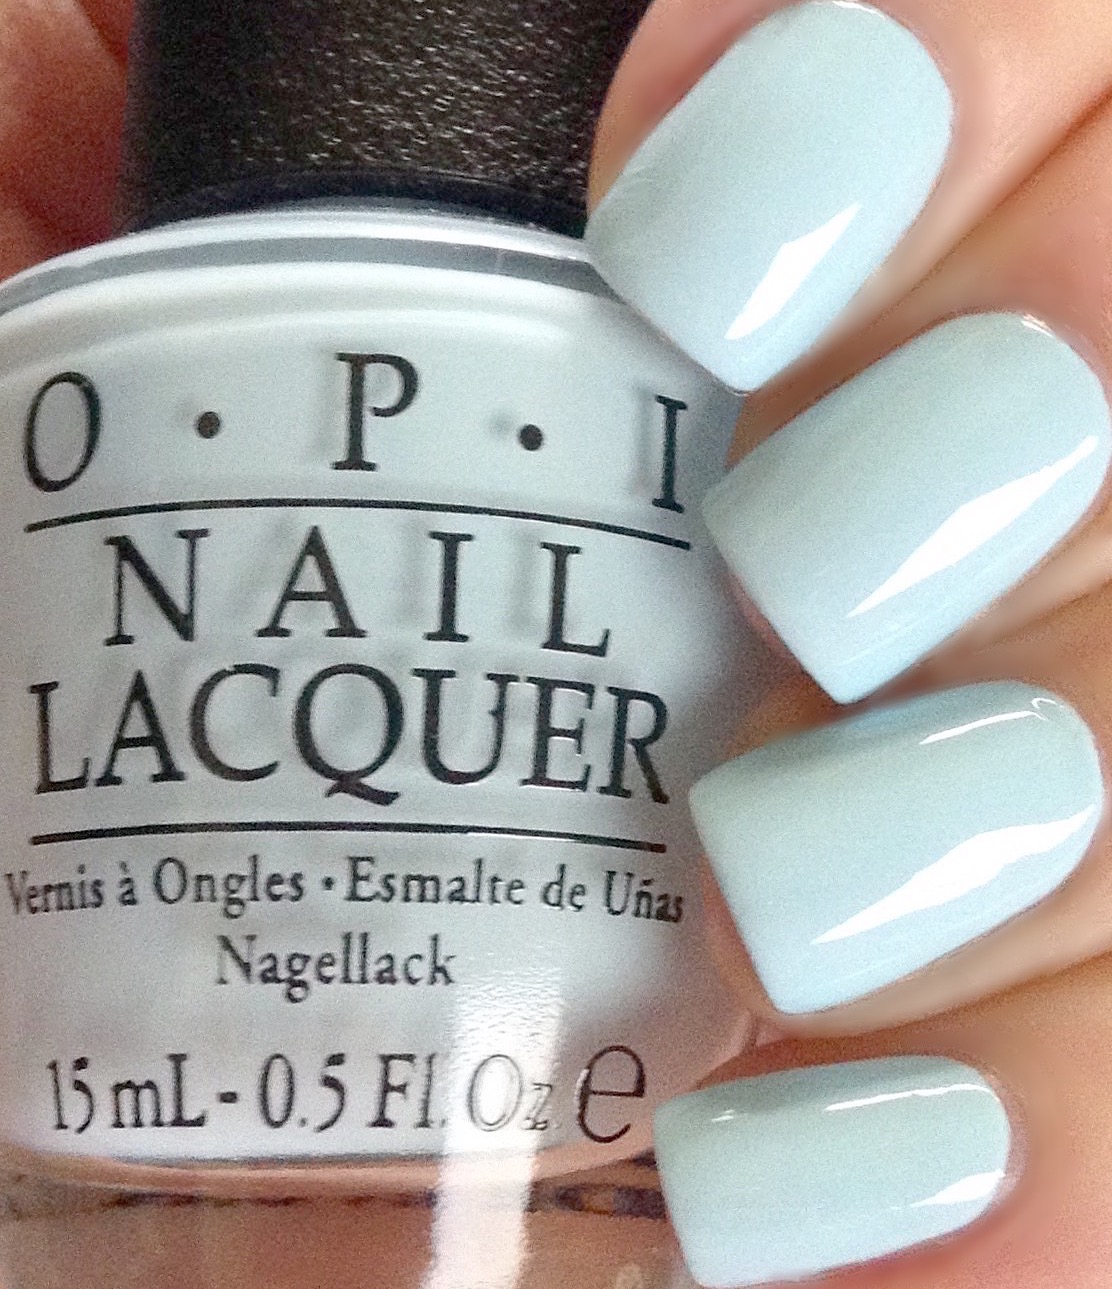 opdagelse Beskrivende Regeringsforordning Don's Nail OBSESSION!: OPI SOFT SHADES (PASTELS) 2016 - SWATCHES & REVIEW